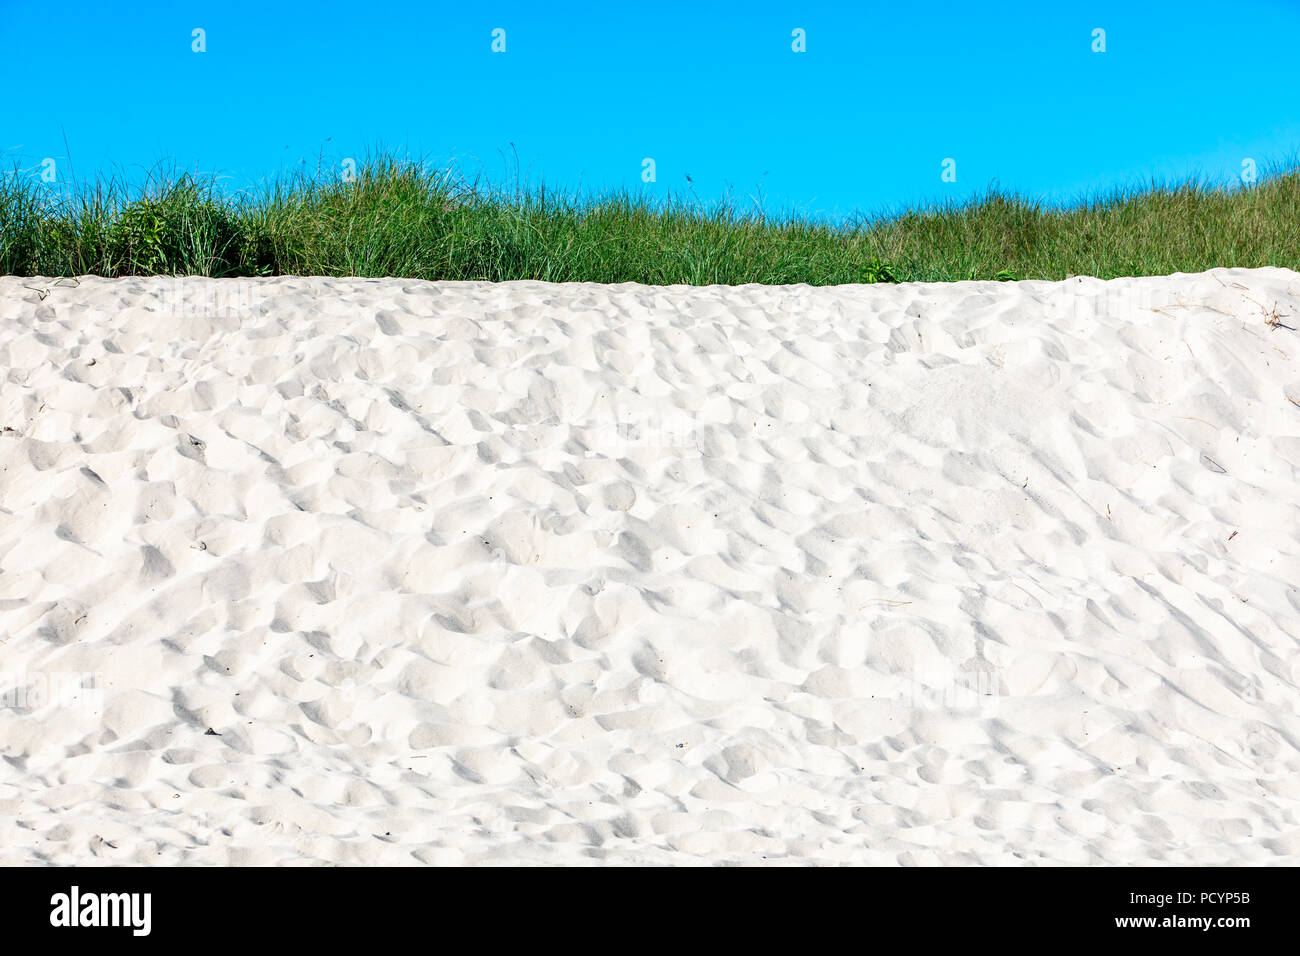 detail shot of a sandy dune with a small piece of grass at the top and a small section of blue sky Stock Photo